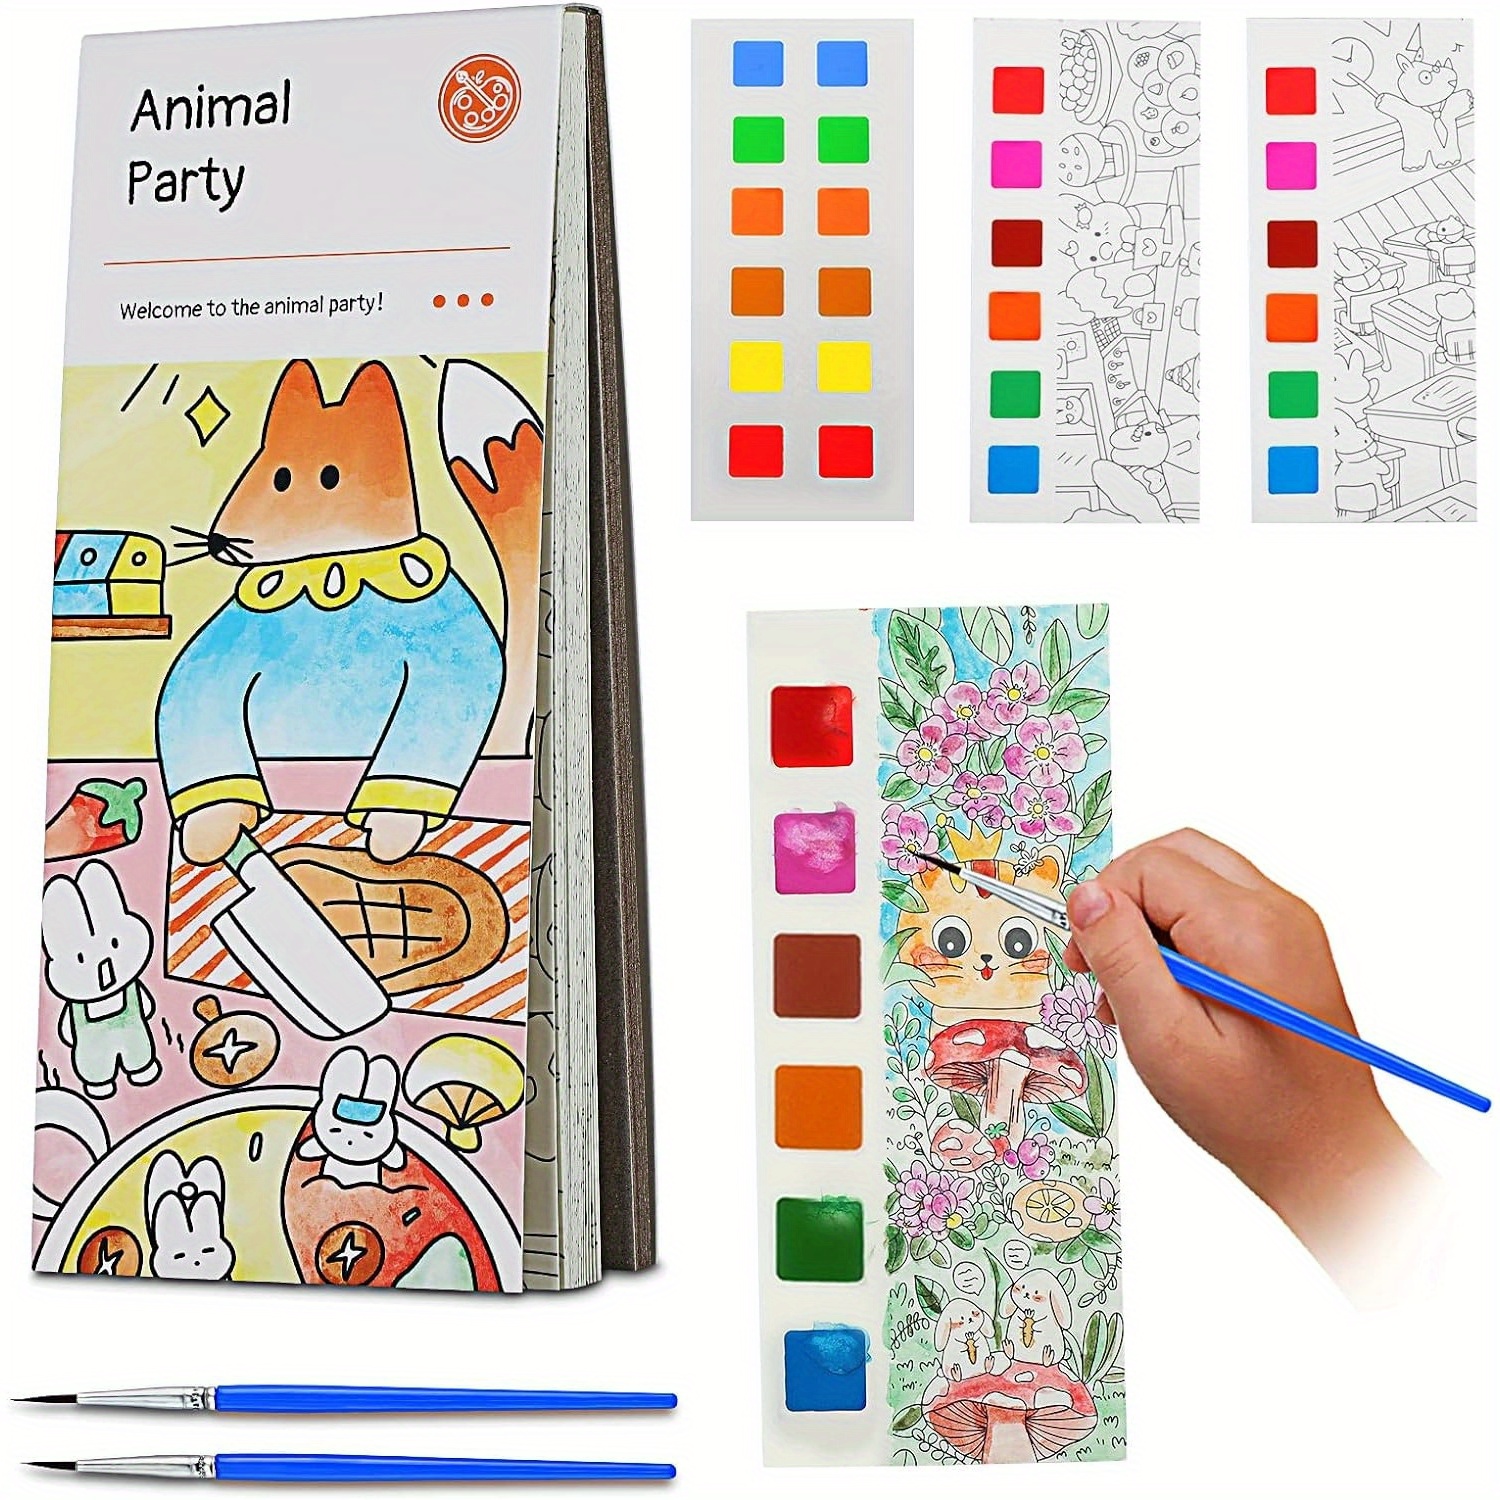 20sheets/set Pocket Watercolor Painting Book, Watercolor Bookmarks To Paint  Travel Pocket Watercolor Kit, Free Shipping For New Users